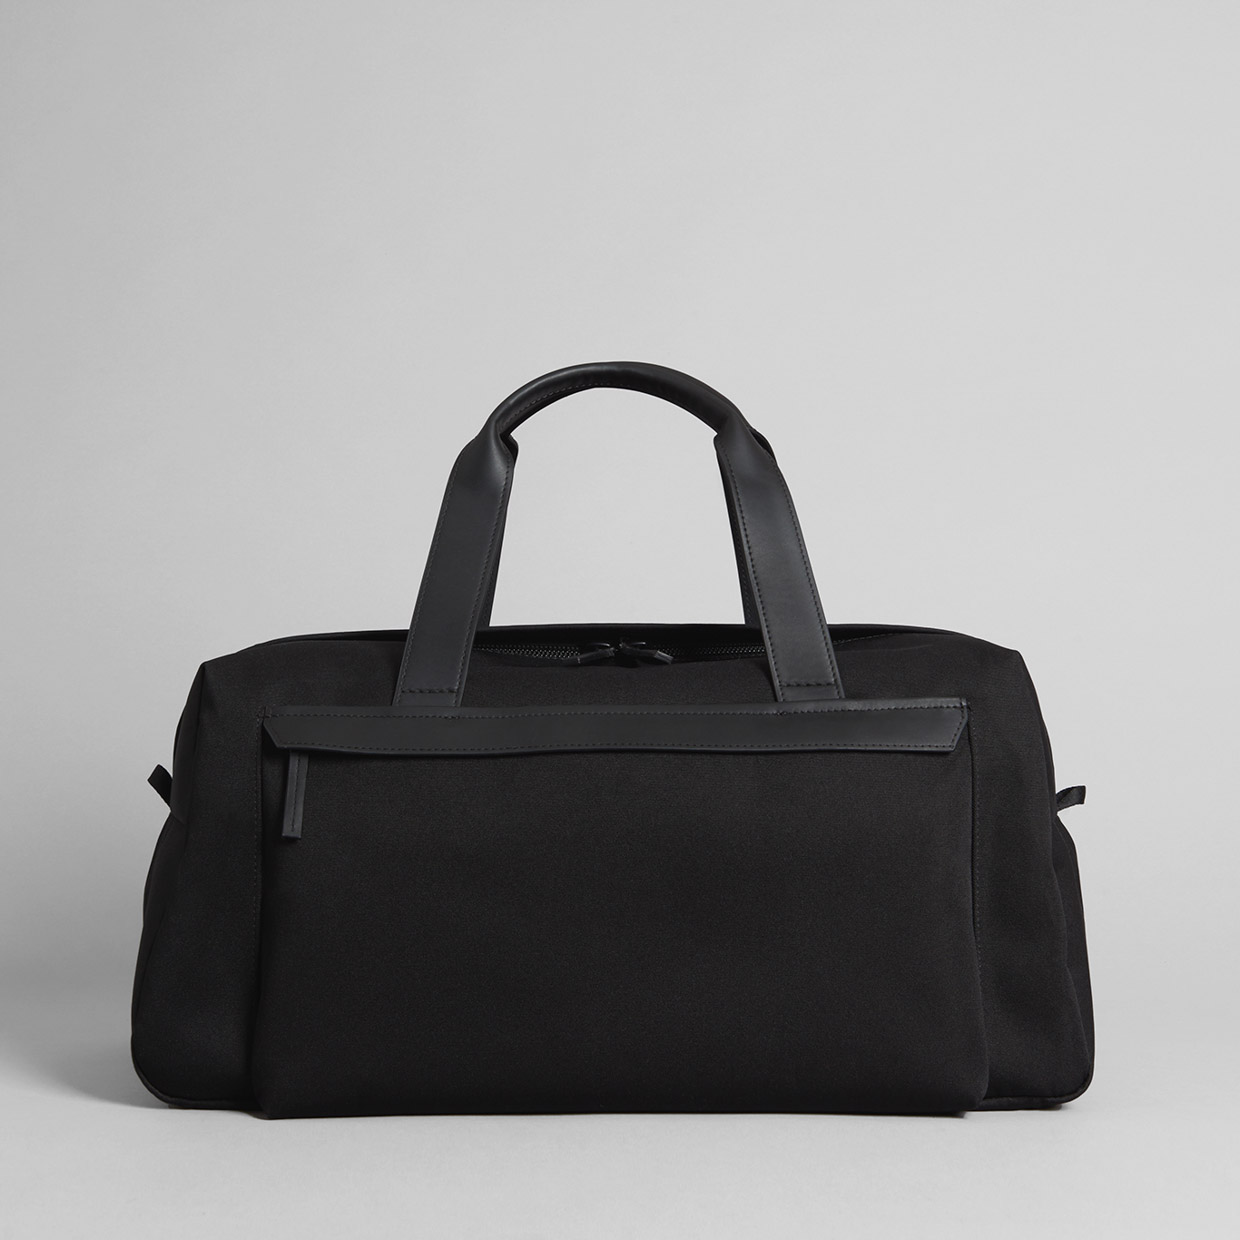 Troubadour's Orbis Circular Bag Collection Recycles Plastic to Reduce Waste